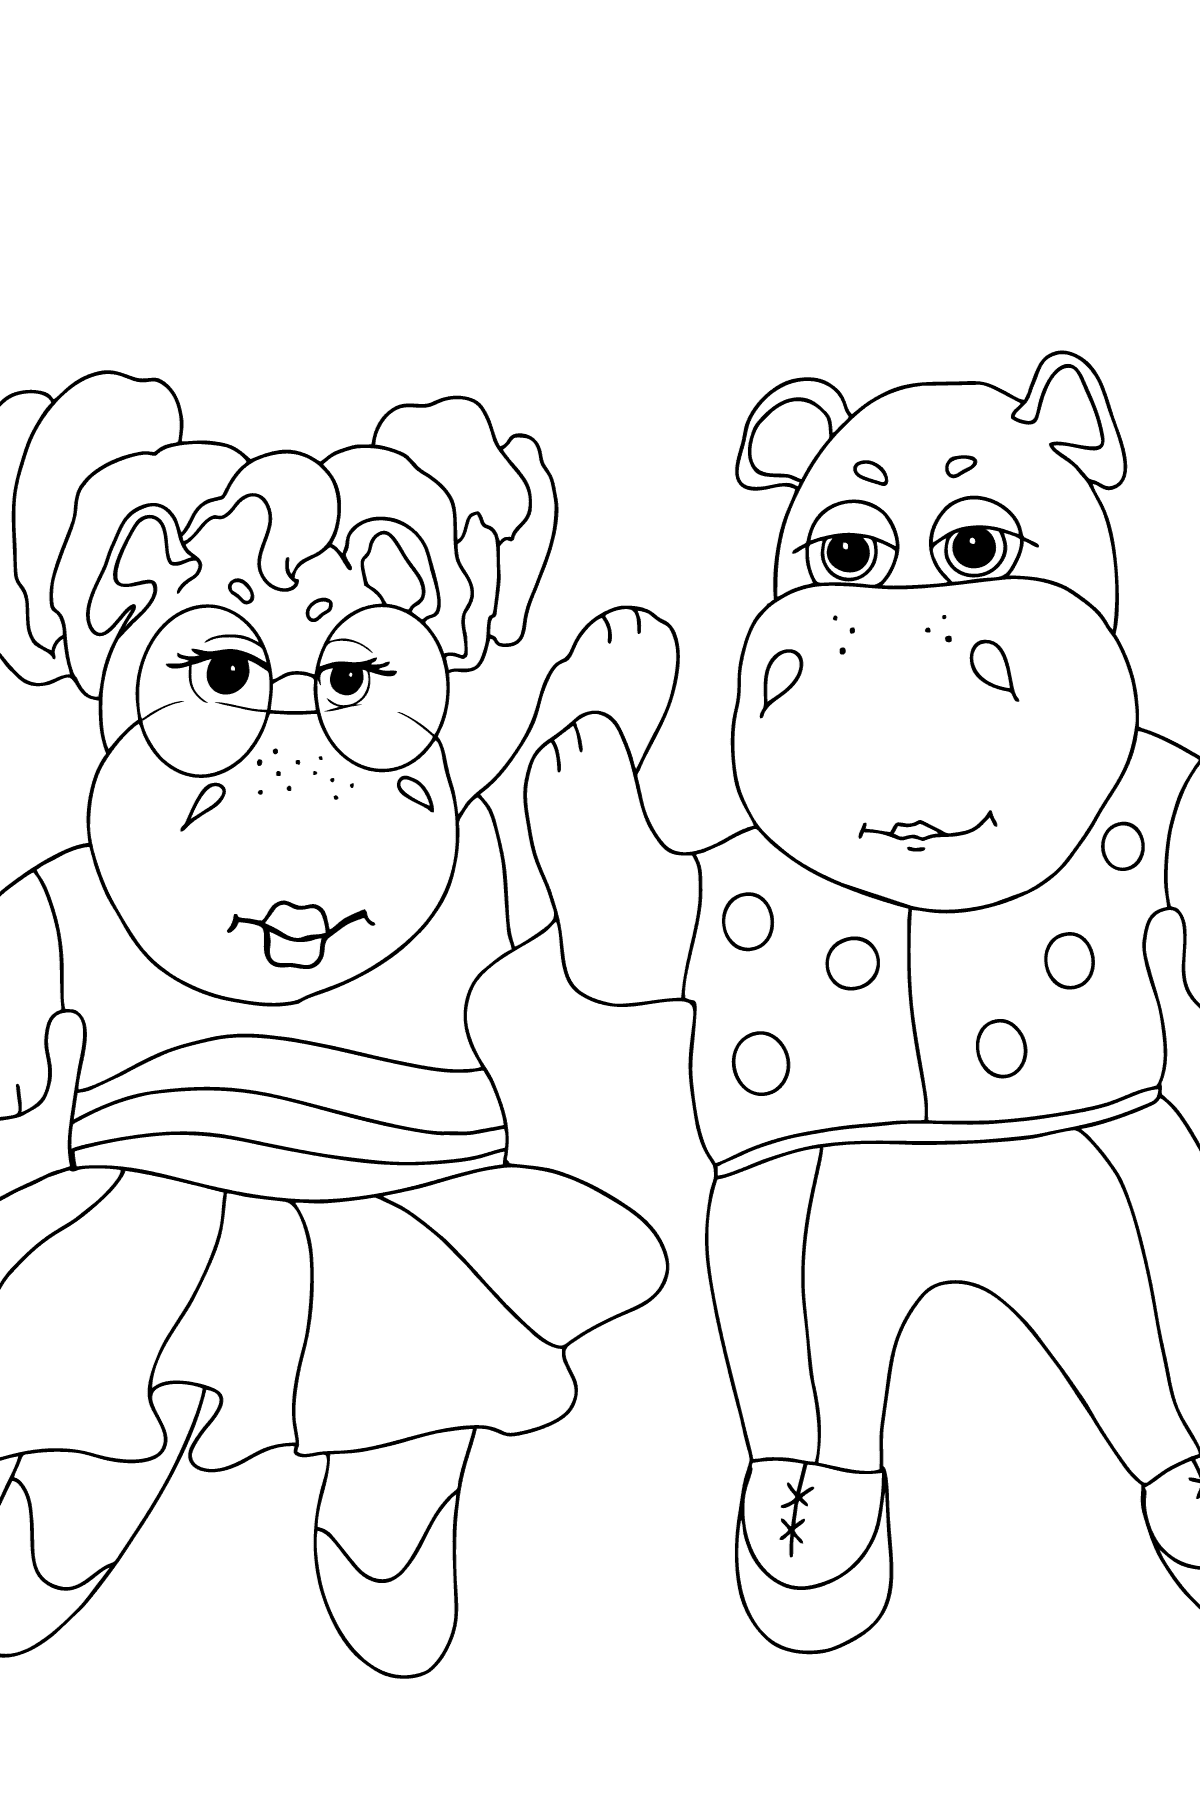 Coloring Page - Hippos are Dancing for Children 